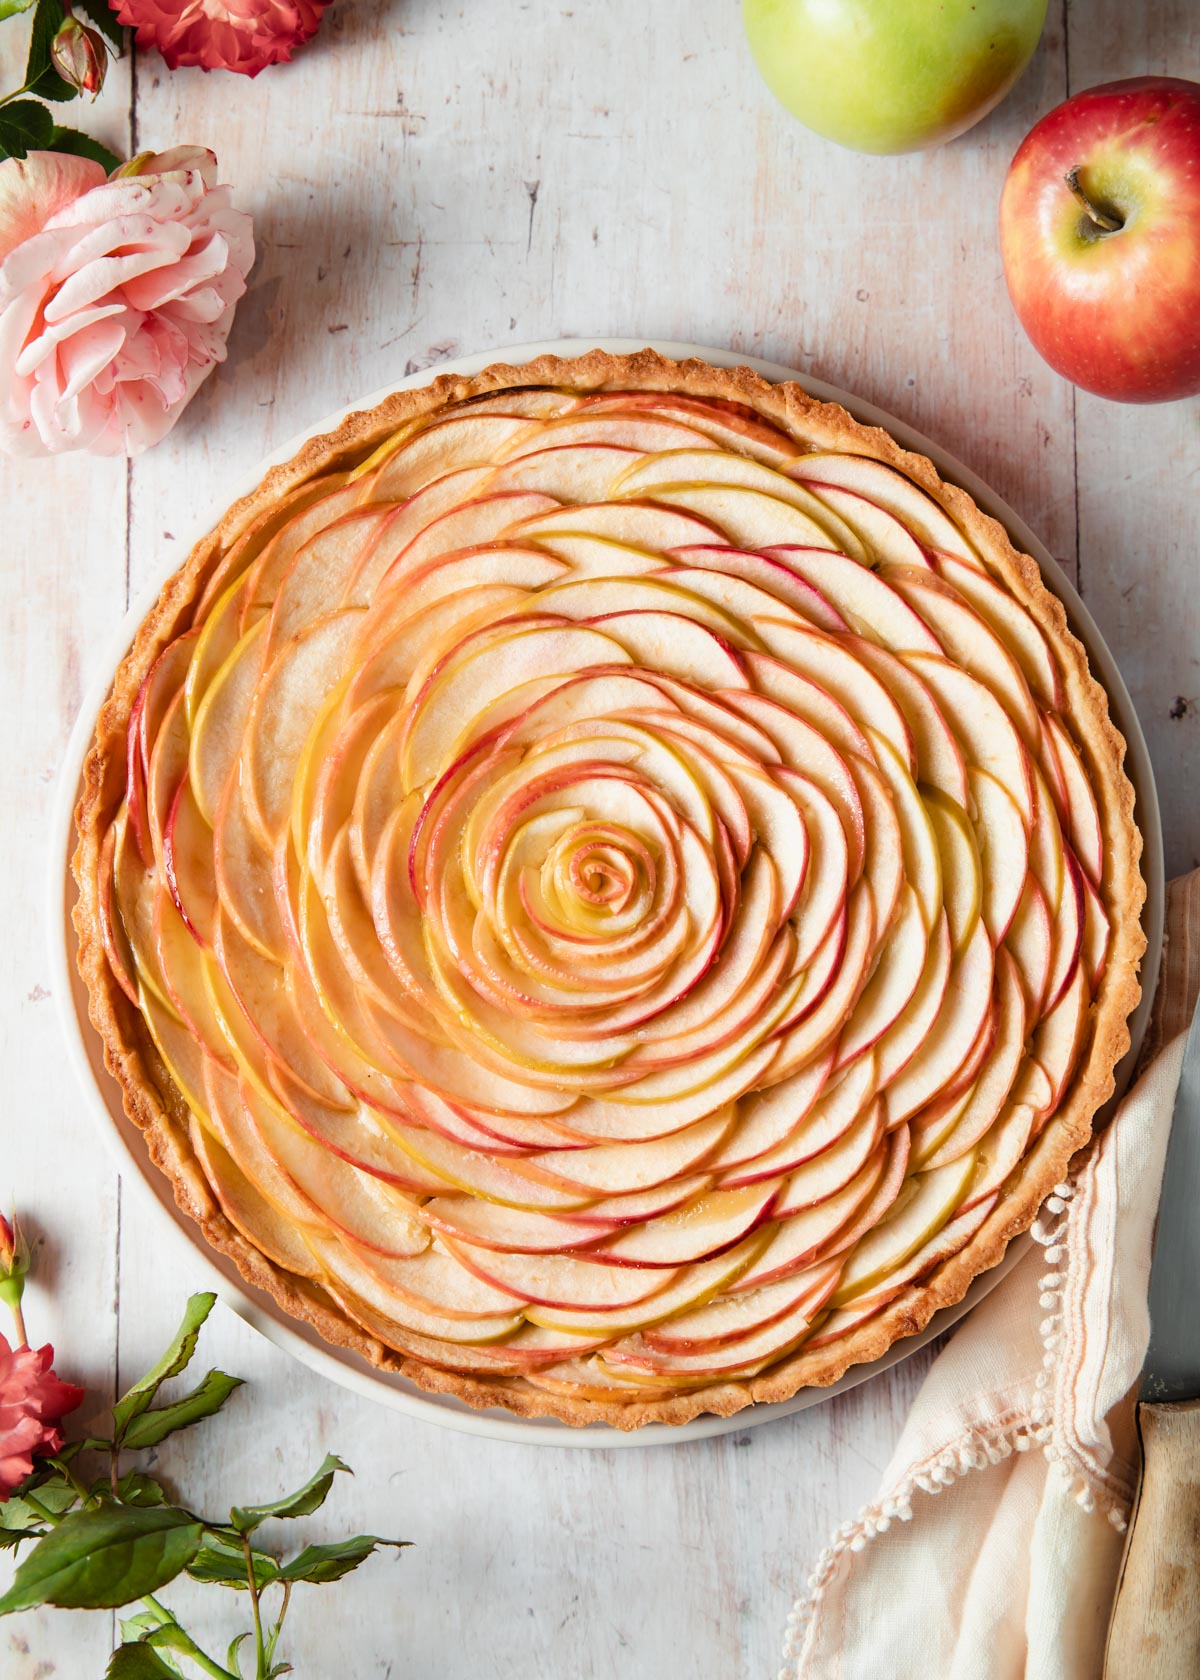 A baked apple tart with almond filling and a rose pattern on top
